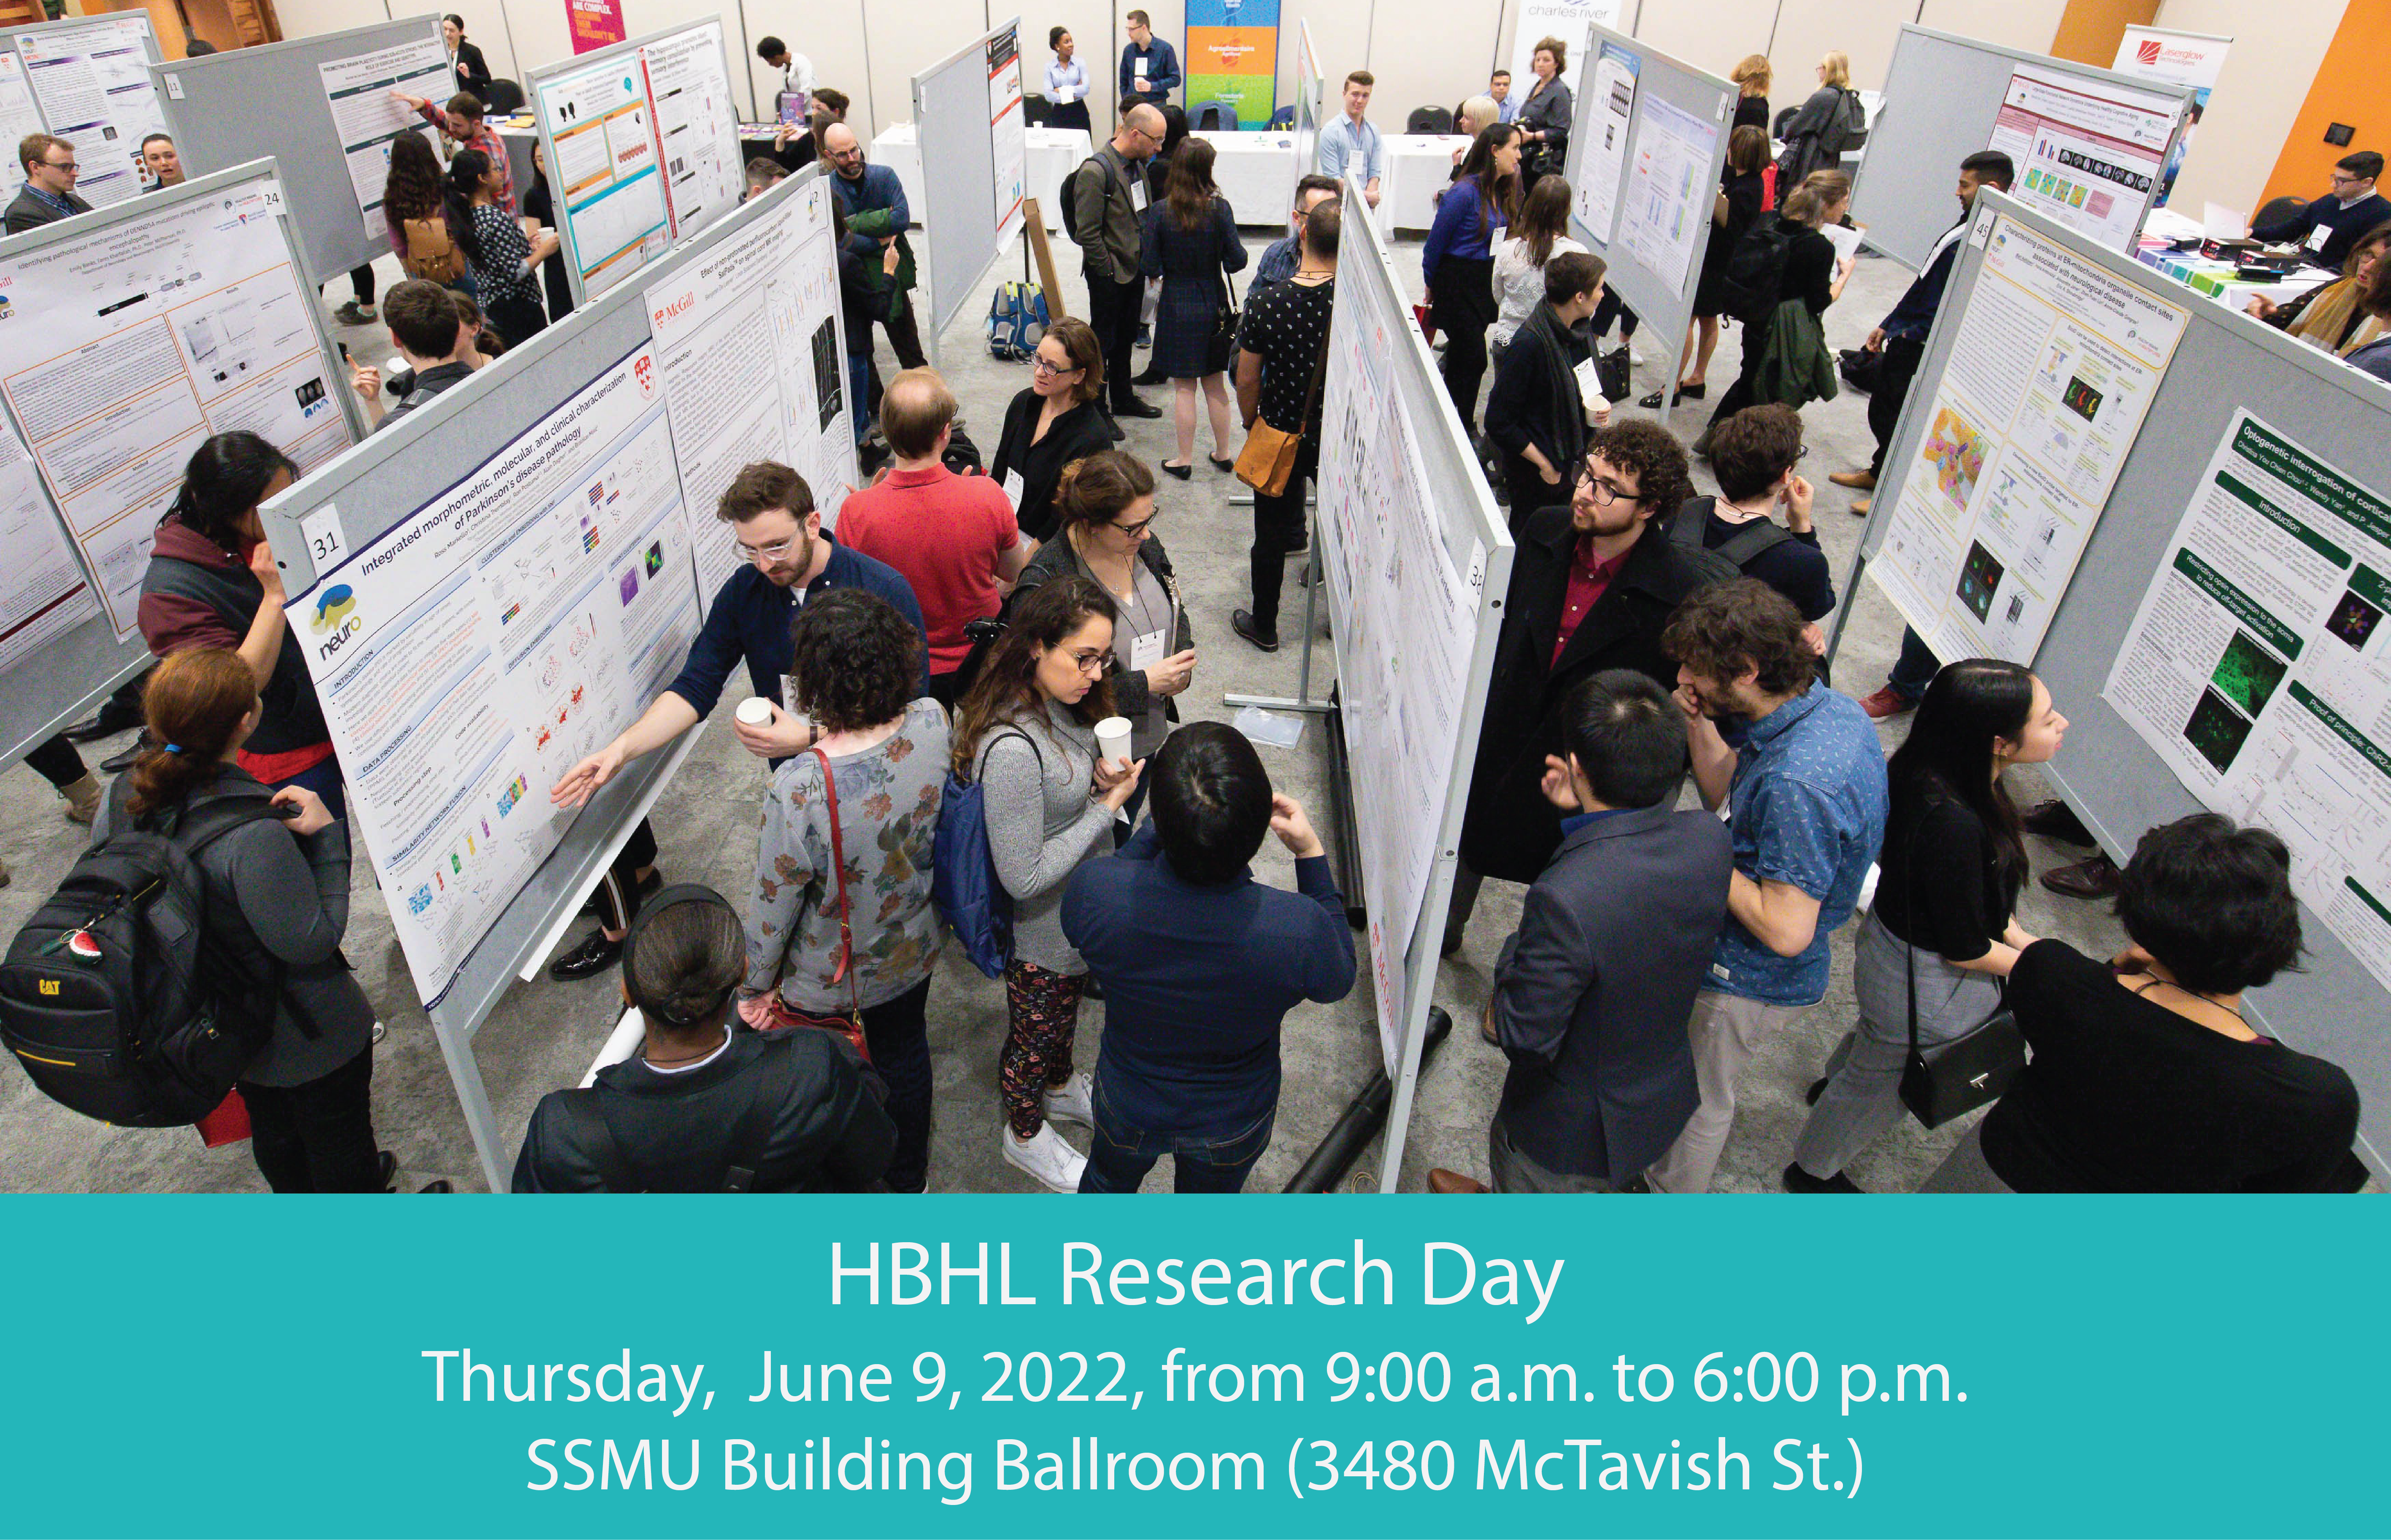 People standing around poster displays. Banner says "HBHL Research Day Thursday, June 9, 2022 From 9:00 a.m. to 6:00 p.m. SSMU Building Ballroom (3480 McTavish St.)"